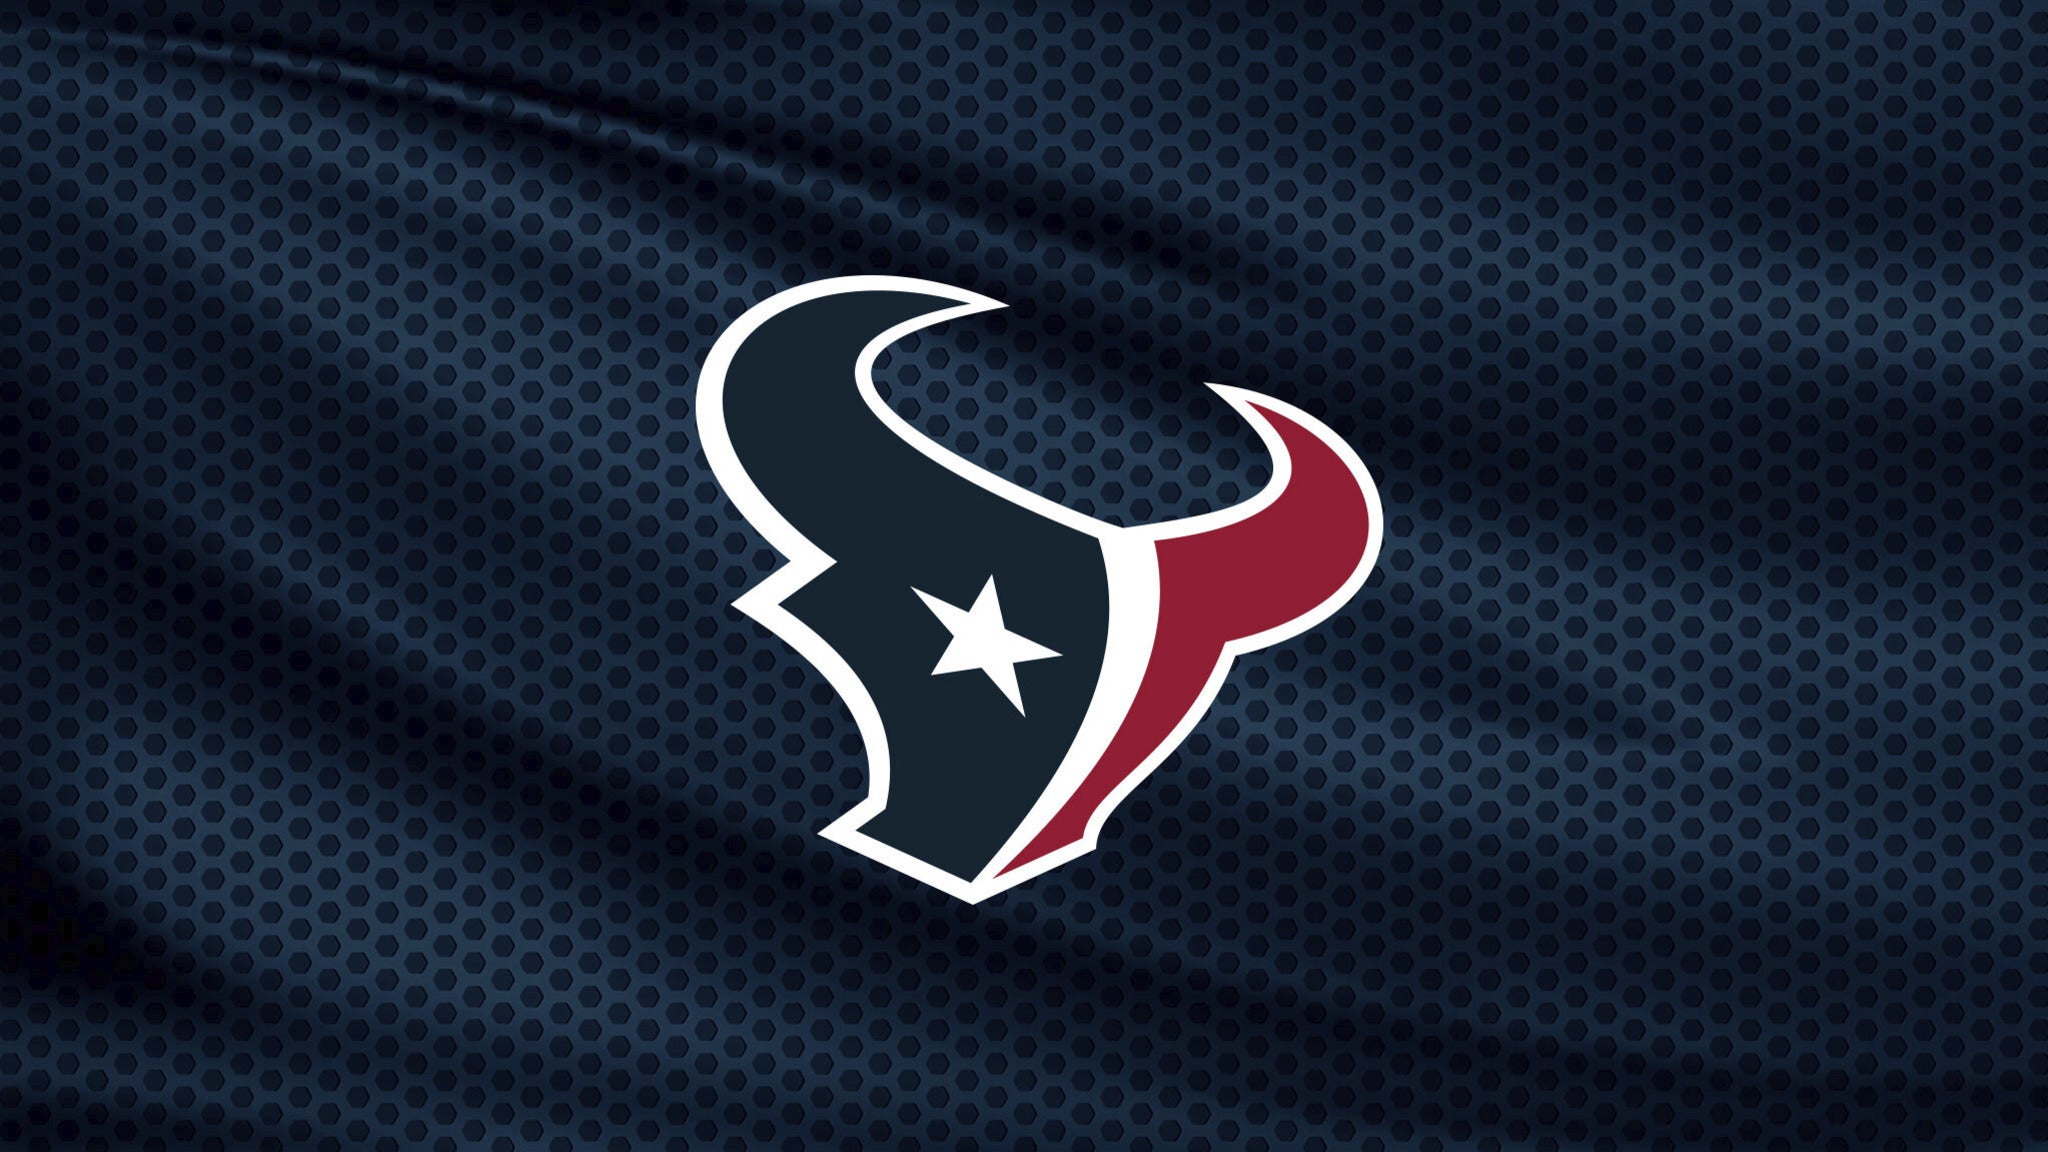 Houston Texans vs. Los Angeles Chargers